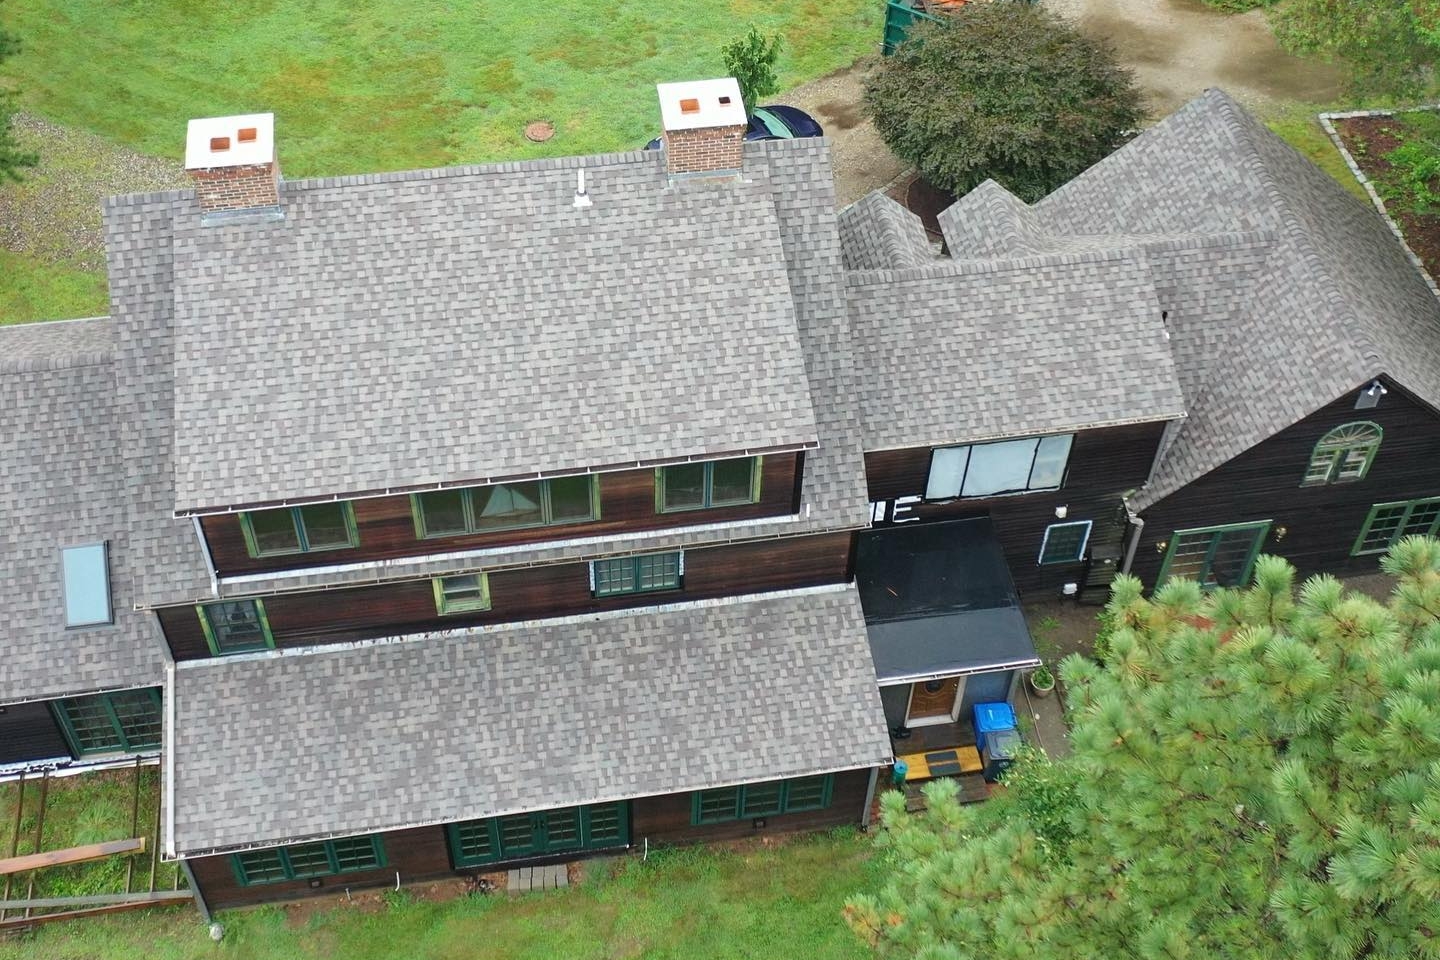 BP Builders Mansfield Center CT | Roofer, Roof Replacement, Roofing Company & General Contractor CT